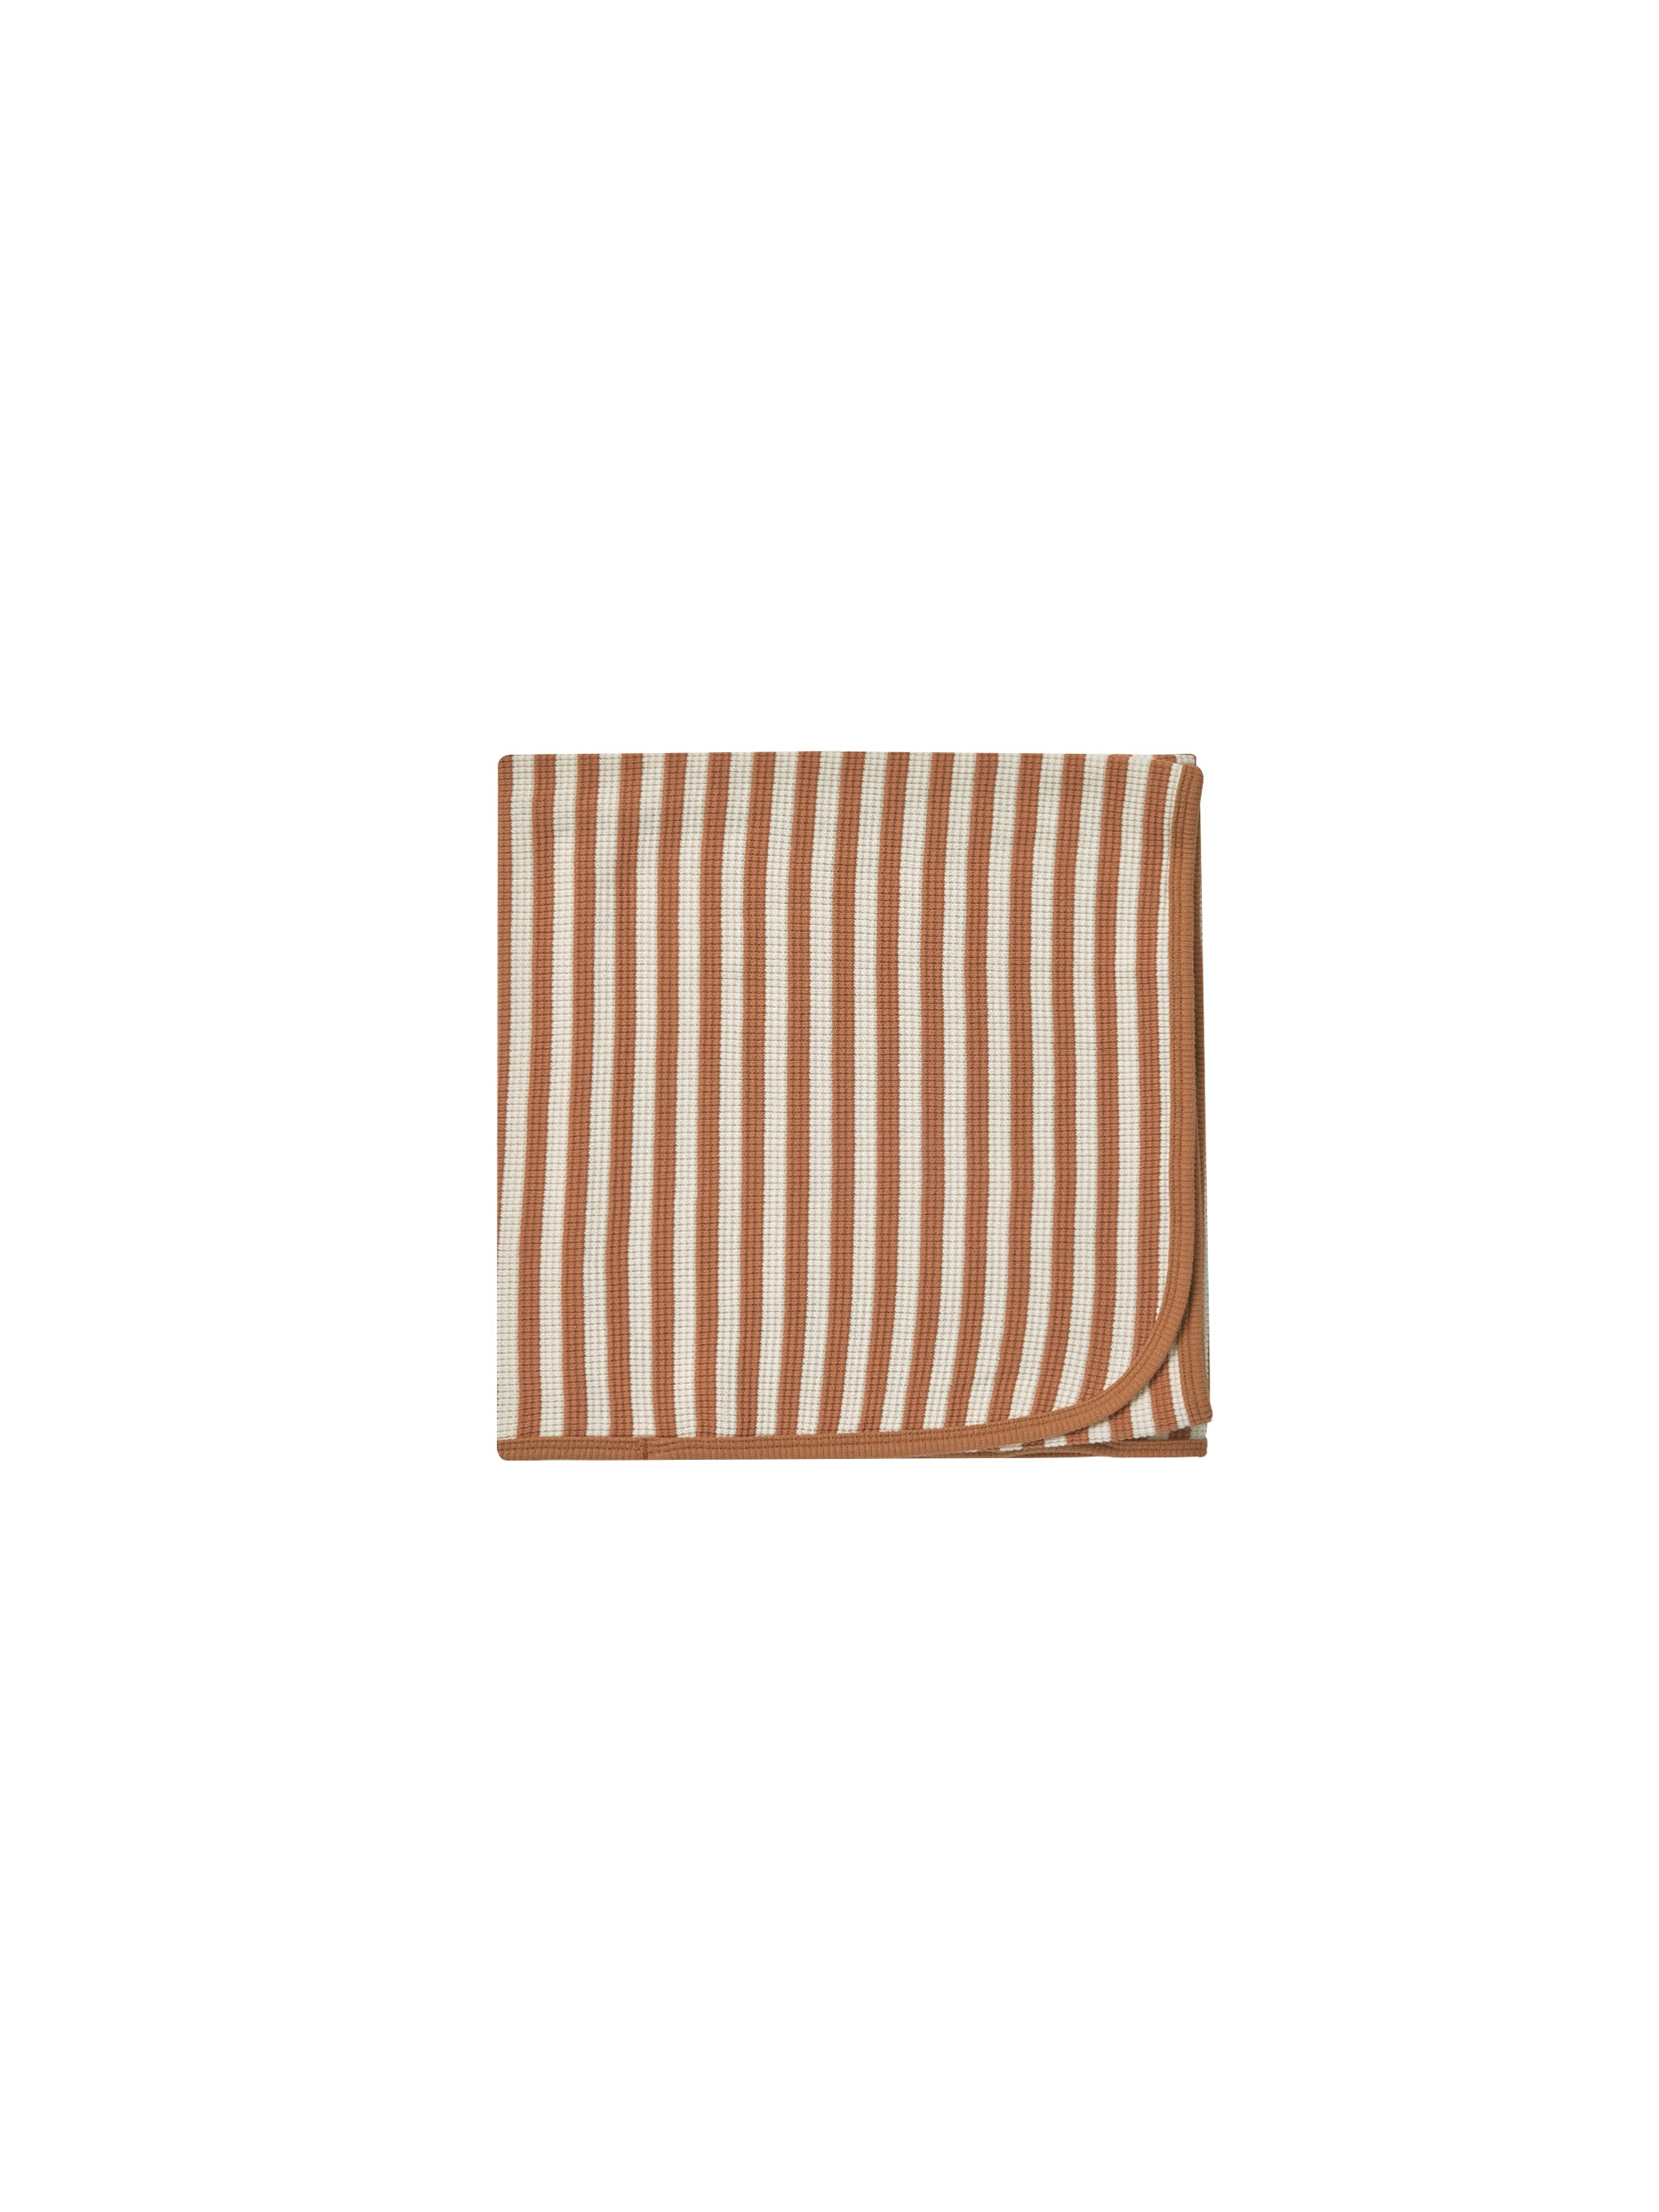 Quincy Mae | Baby Blanket || Clay Stripe